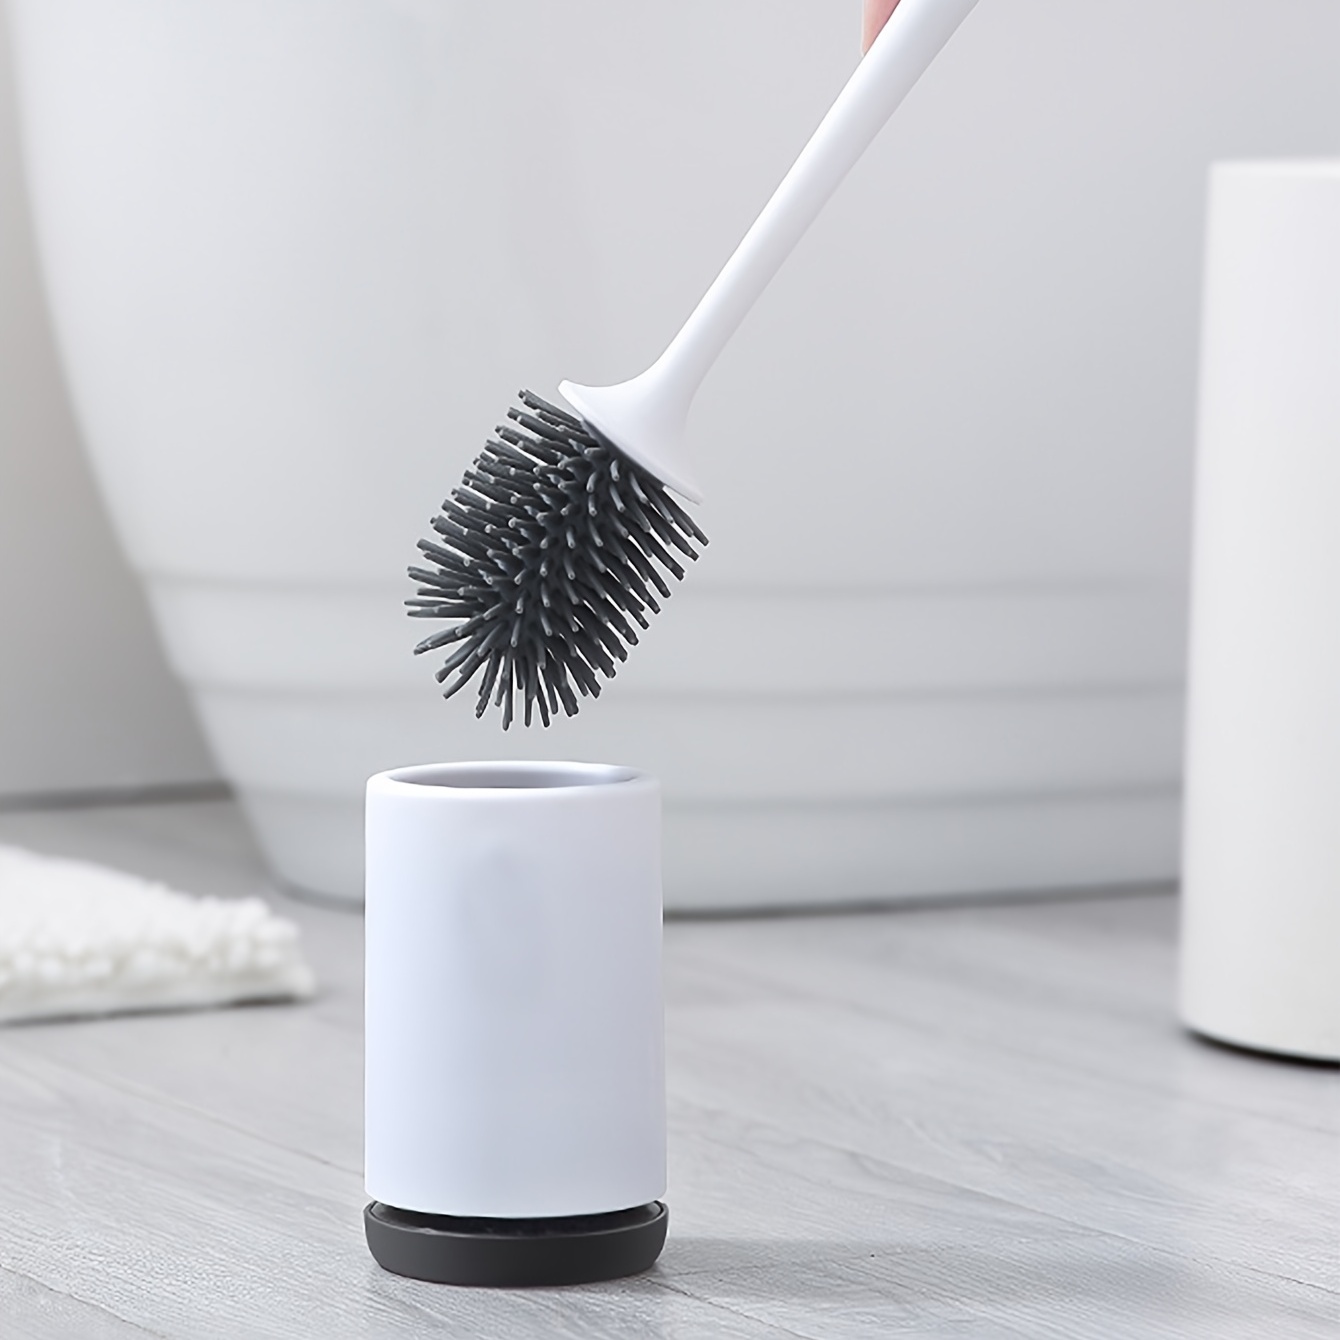 1pc Toilet Brush With Wall Holder, Silicone Bristles, Deep